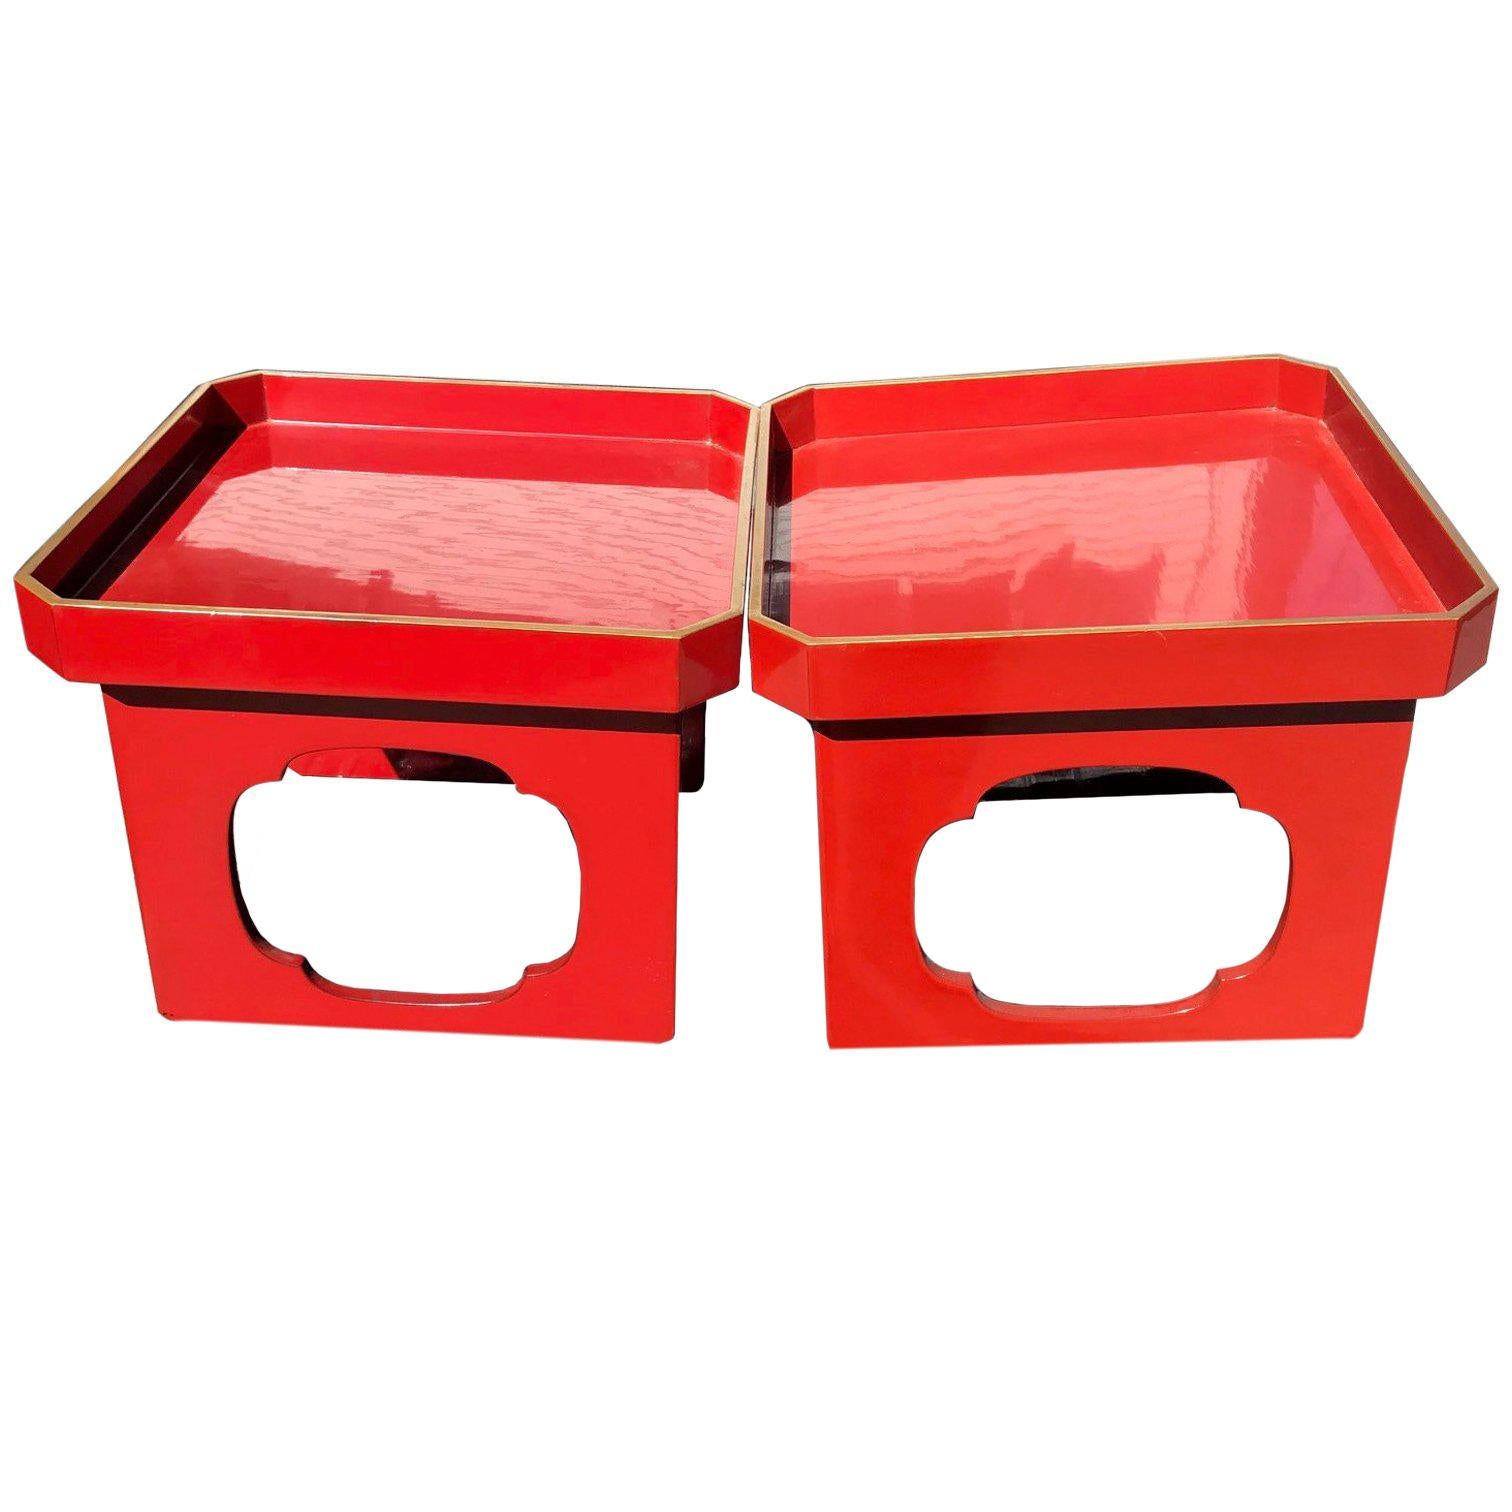 Glistening Japanese Pair of Antique Red & Black Lacquer Pedestals, Food Servers